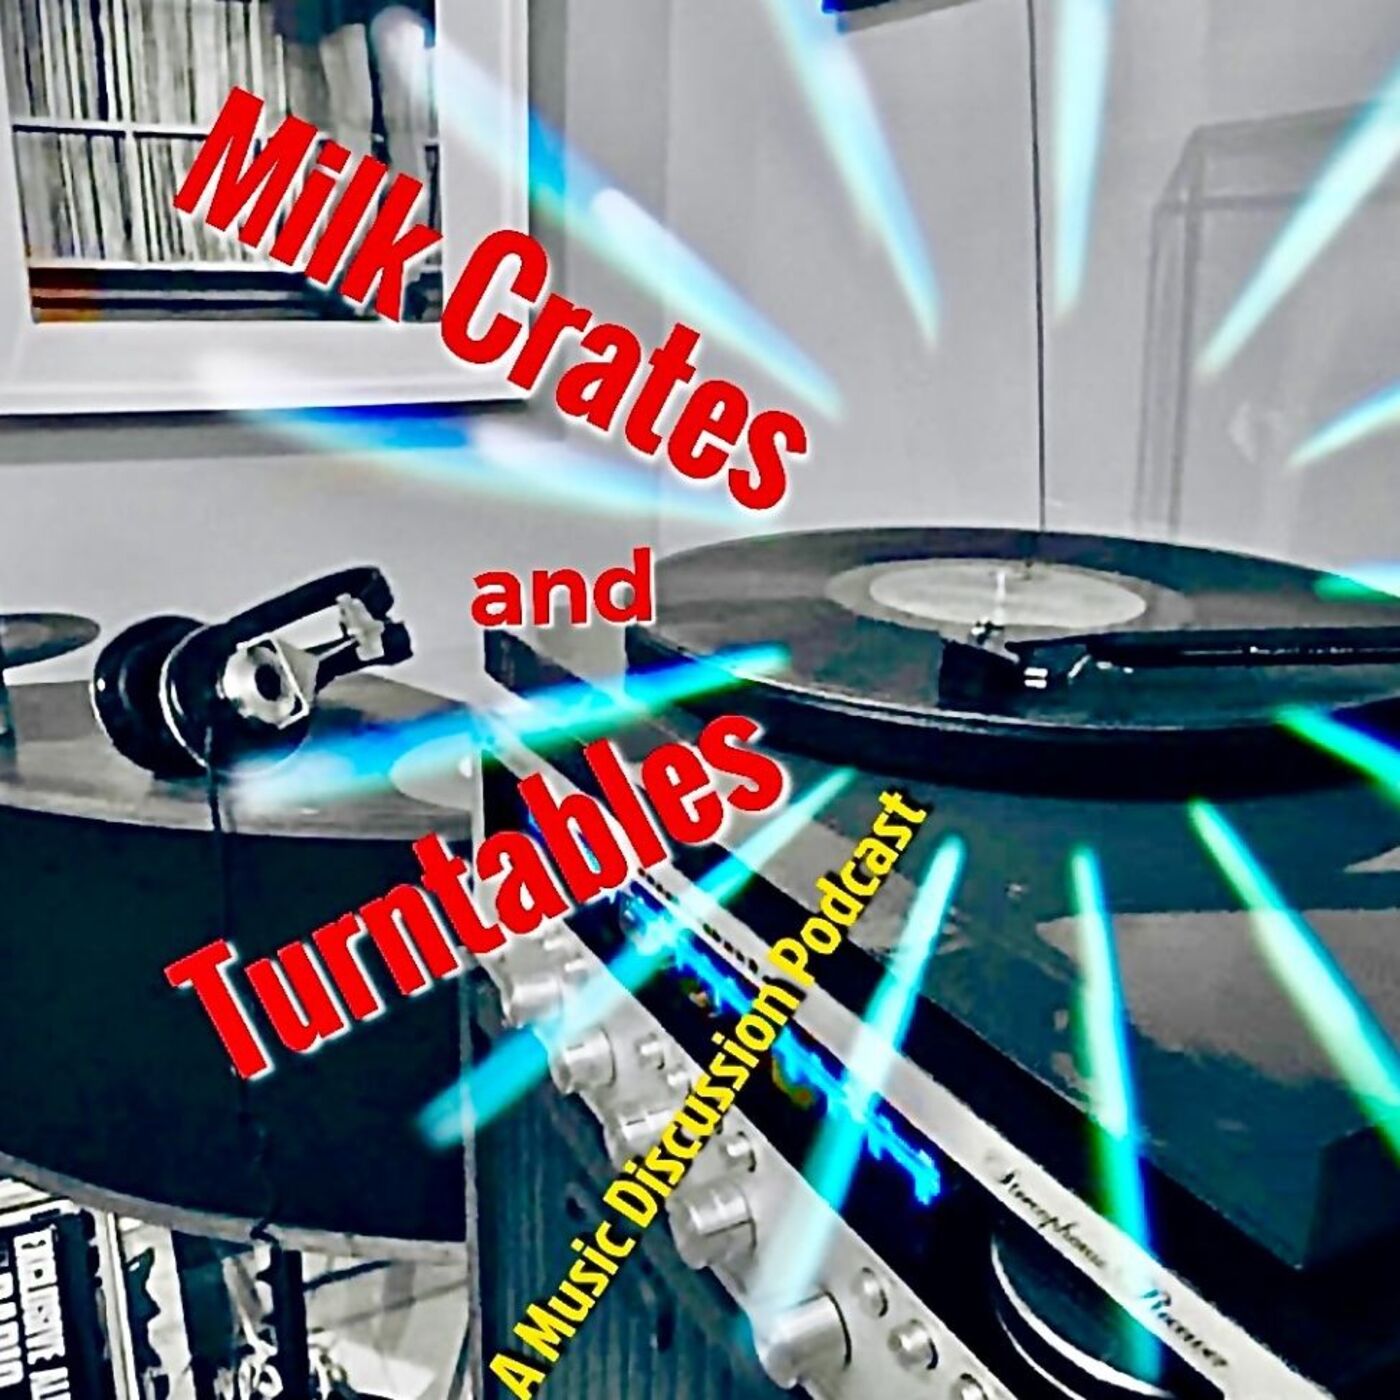 Fresh update on "1994" discussed on Milk Crates and Turntables. A Music Discussion Podcast